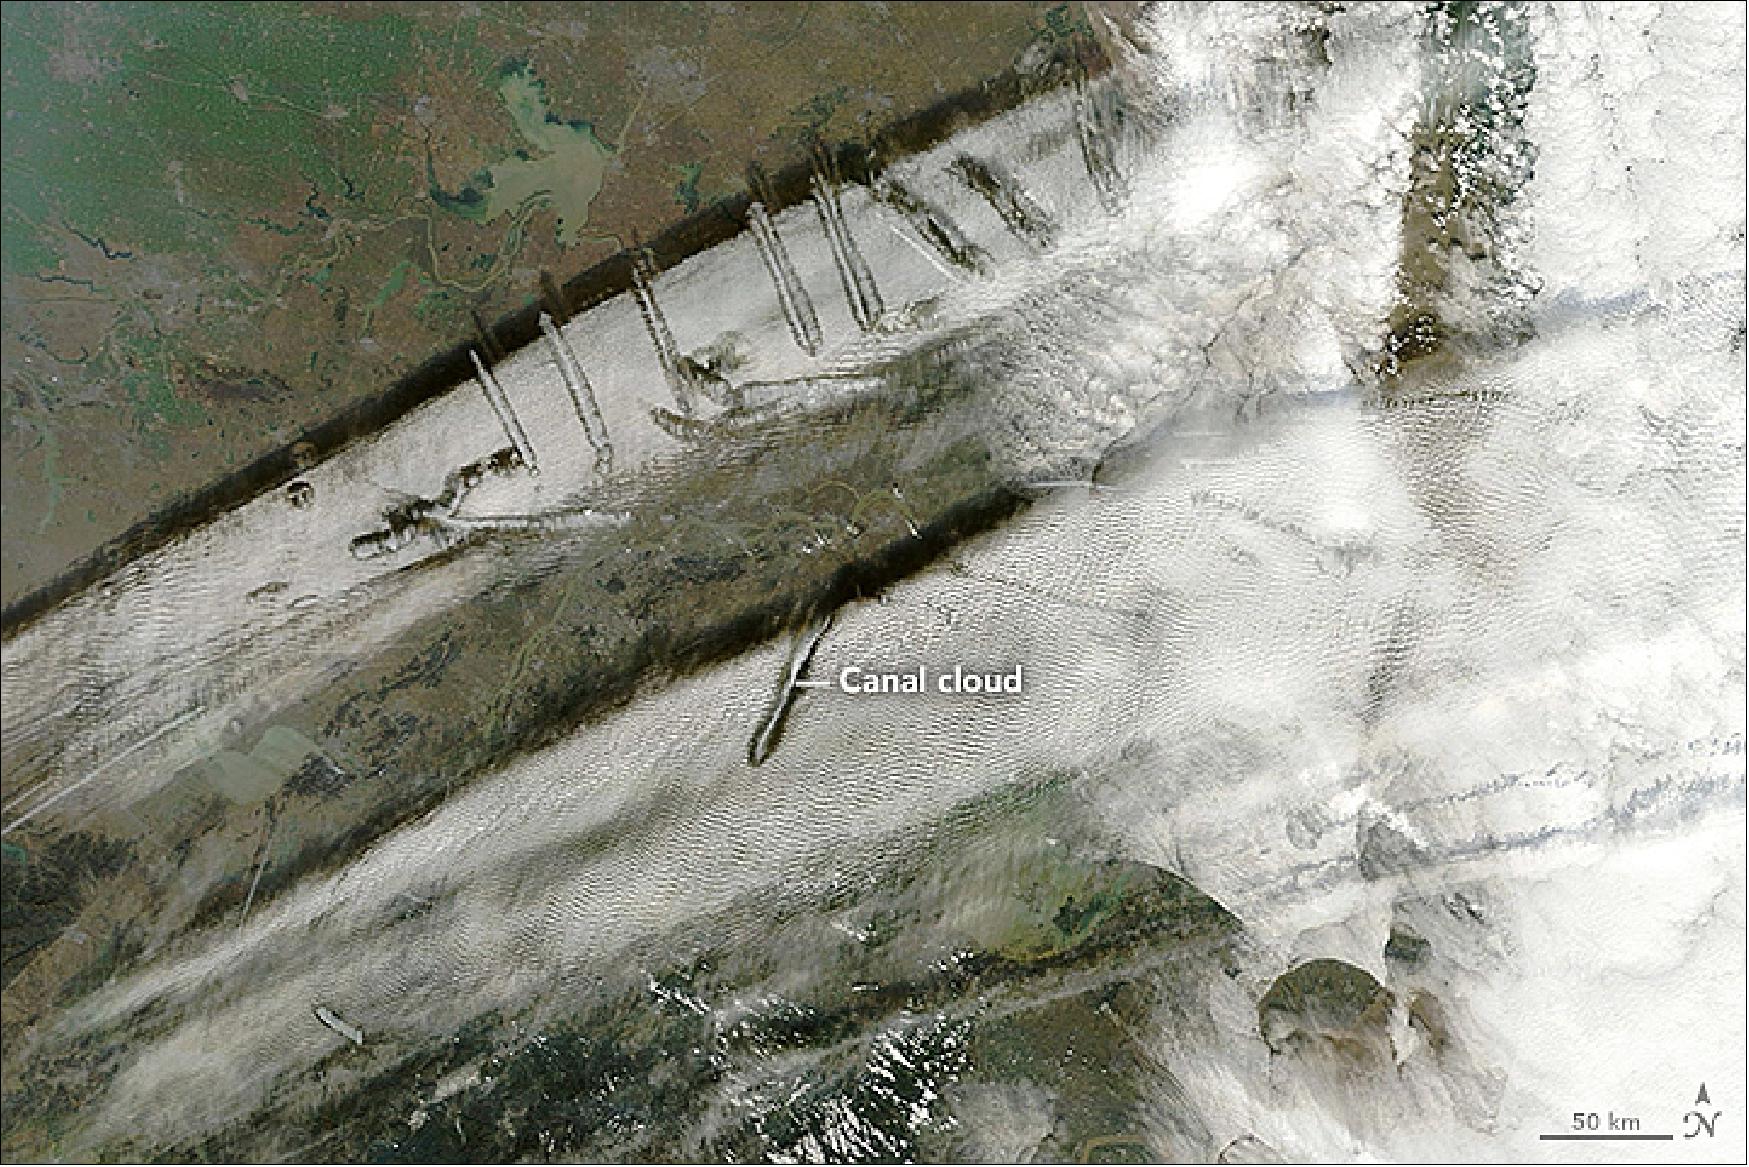 Figure 76: The MODIS instrument on Terra acquired this image on Dec. 28, 2016 over eastern China showing the display of canal clouds (image credit: NASA Earth Observatory, image by Joshua Stevens,caption by Kathryn Hansen)